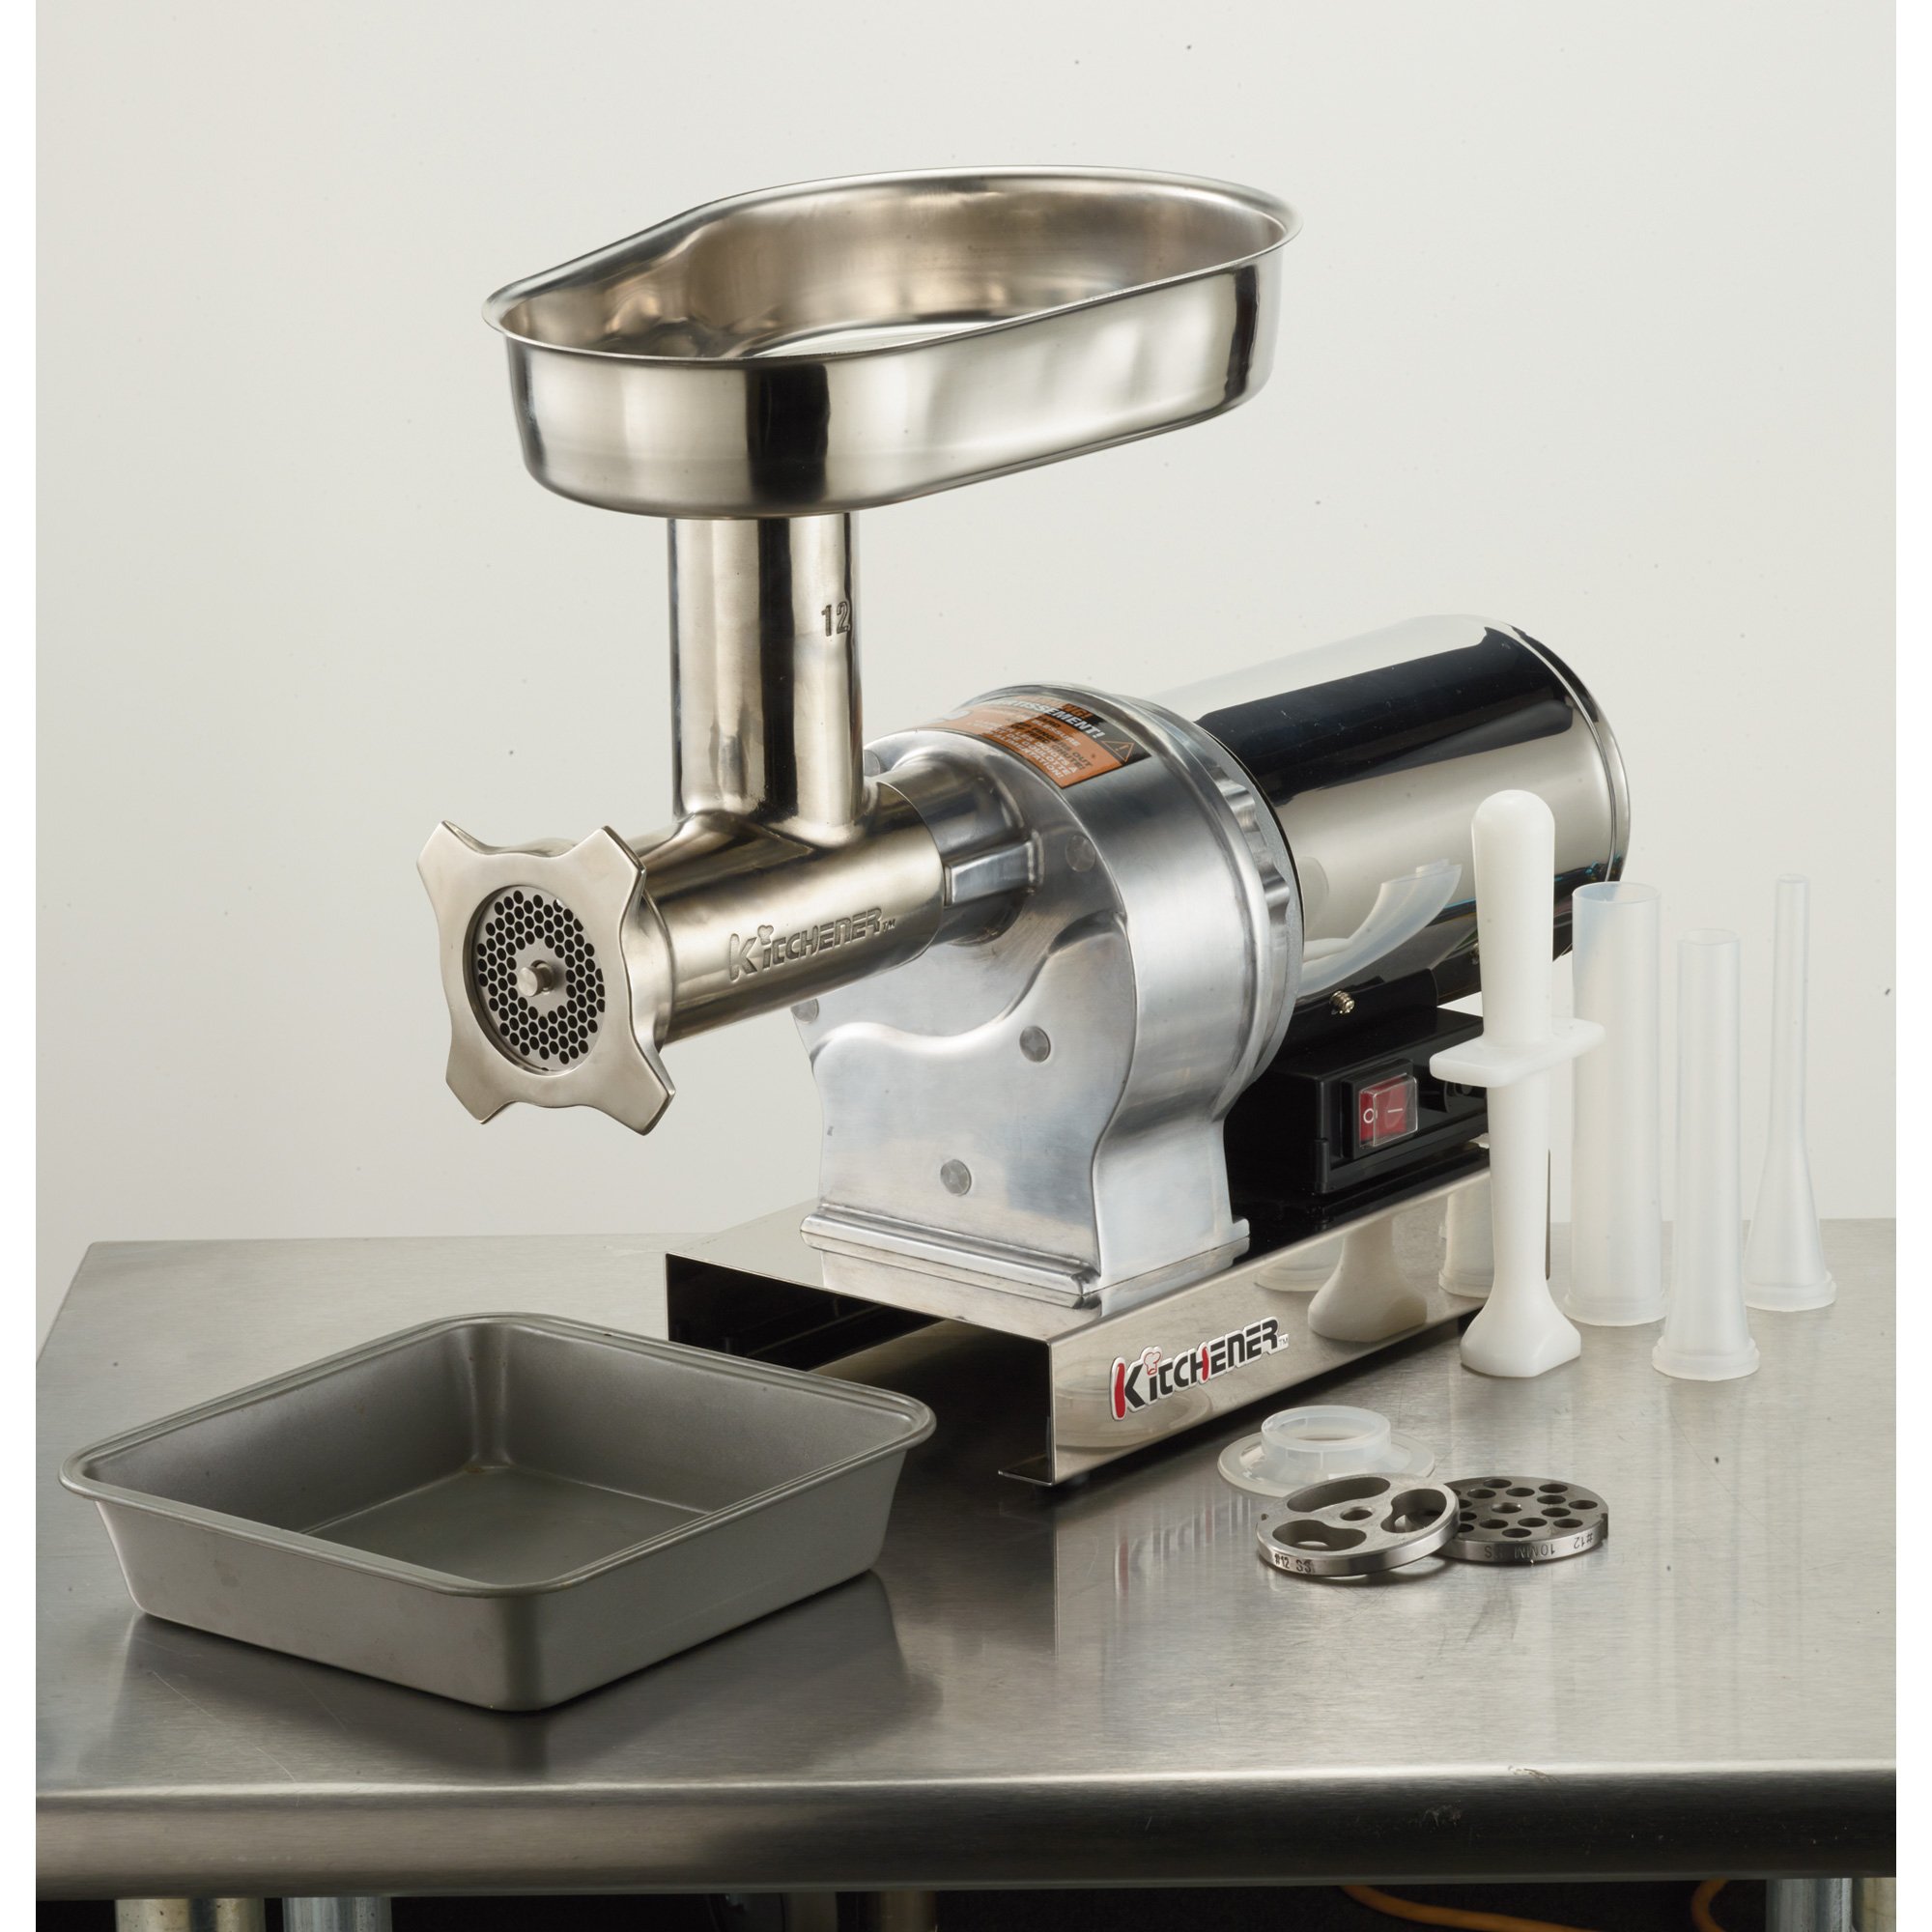 Kitchener™ Heavy Duty Electric Meat Grinder